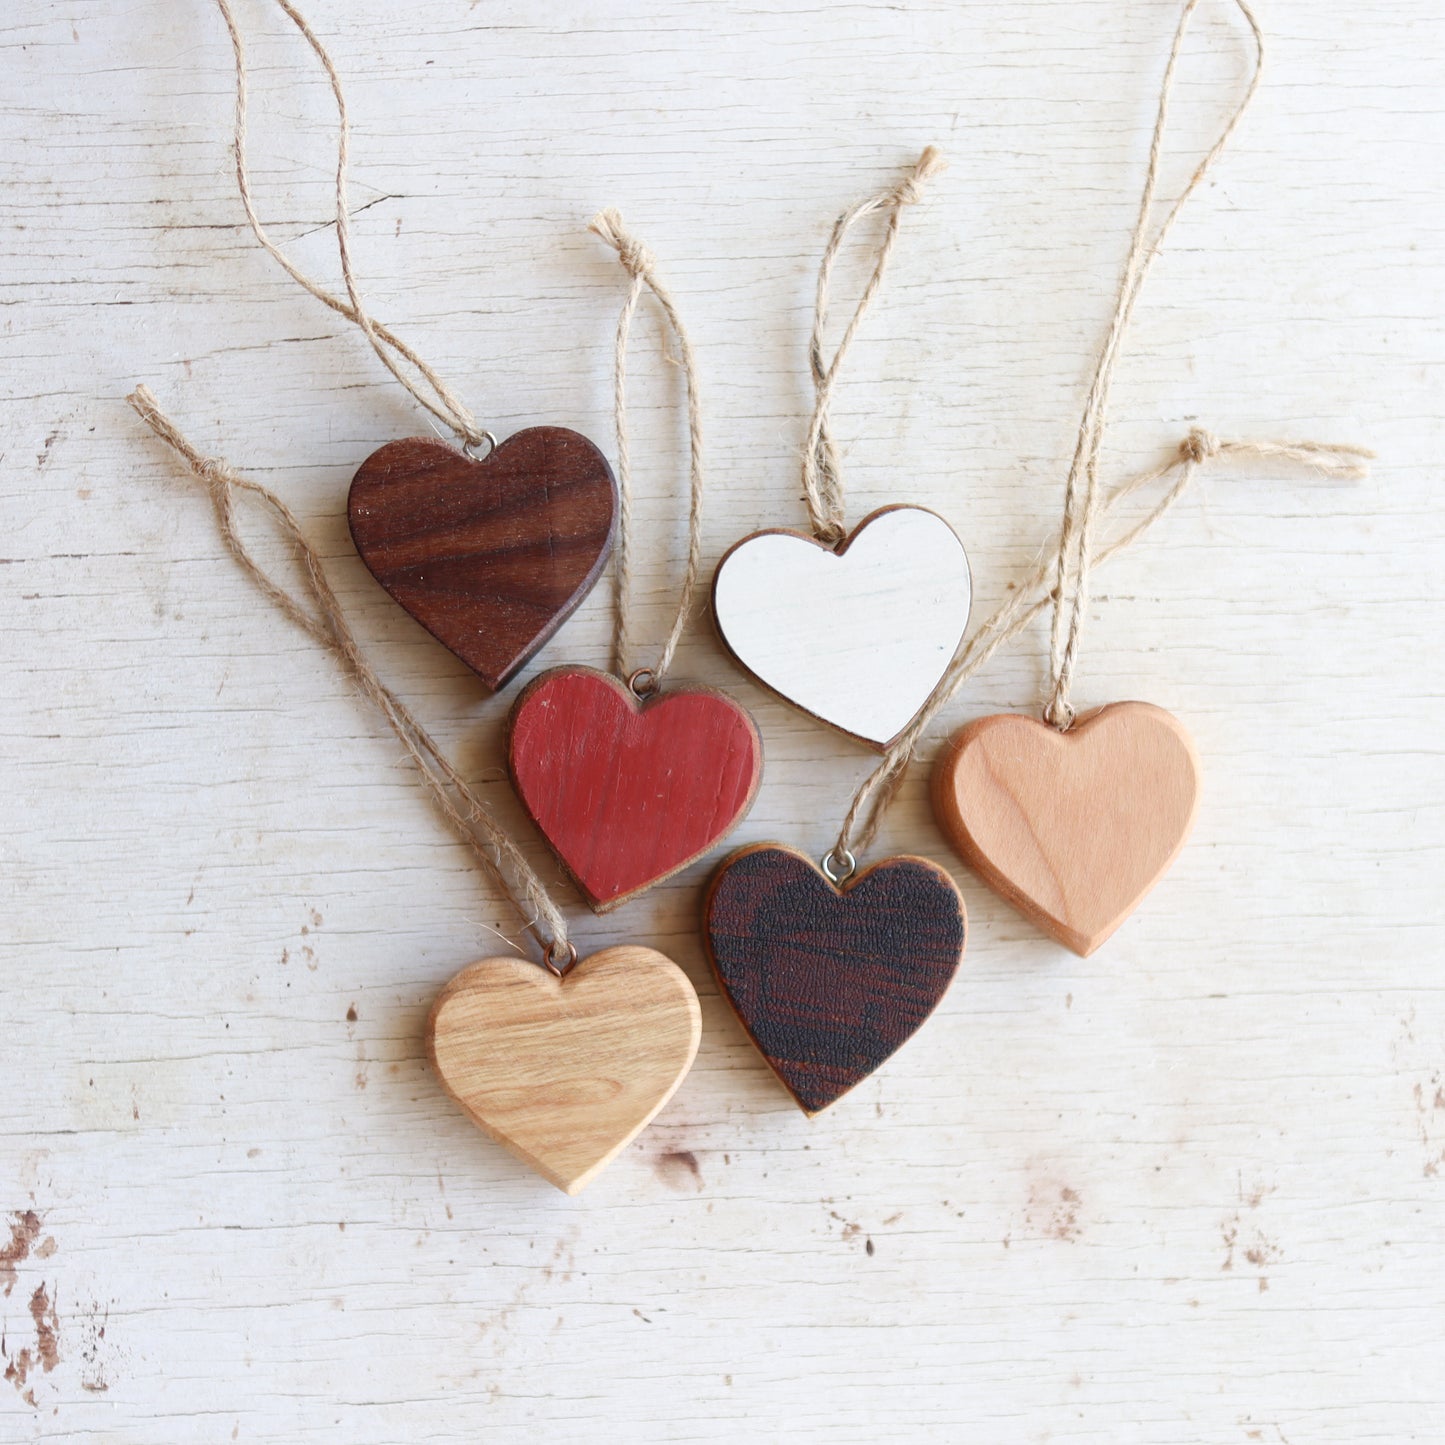 Reclaimed Pallet Wood Hearts – Dennehey Design Co.